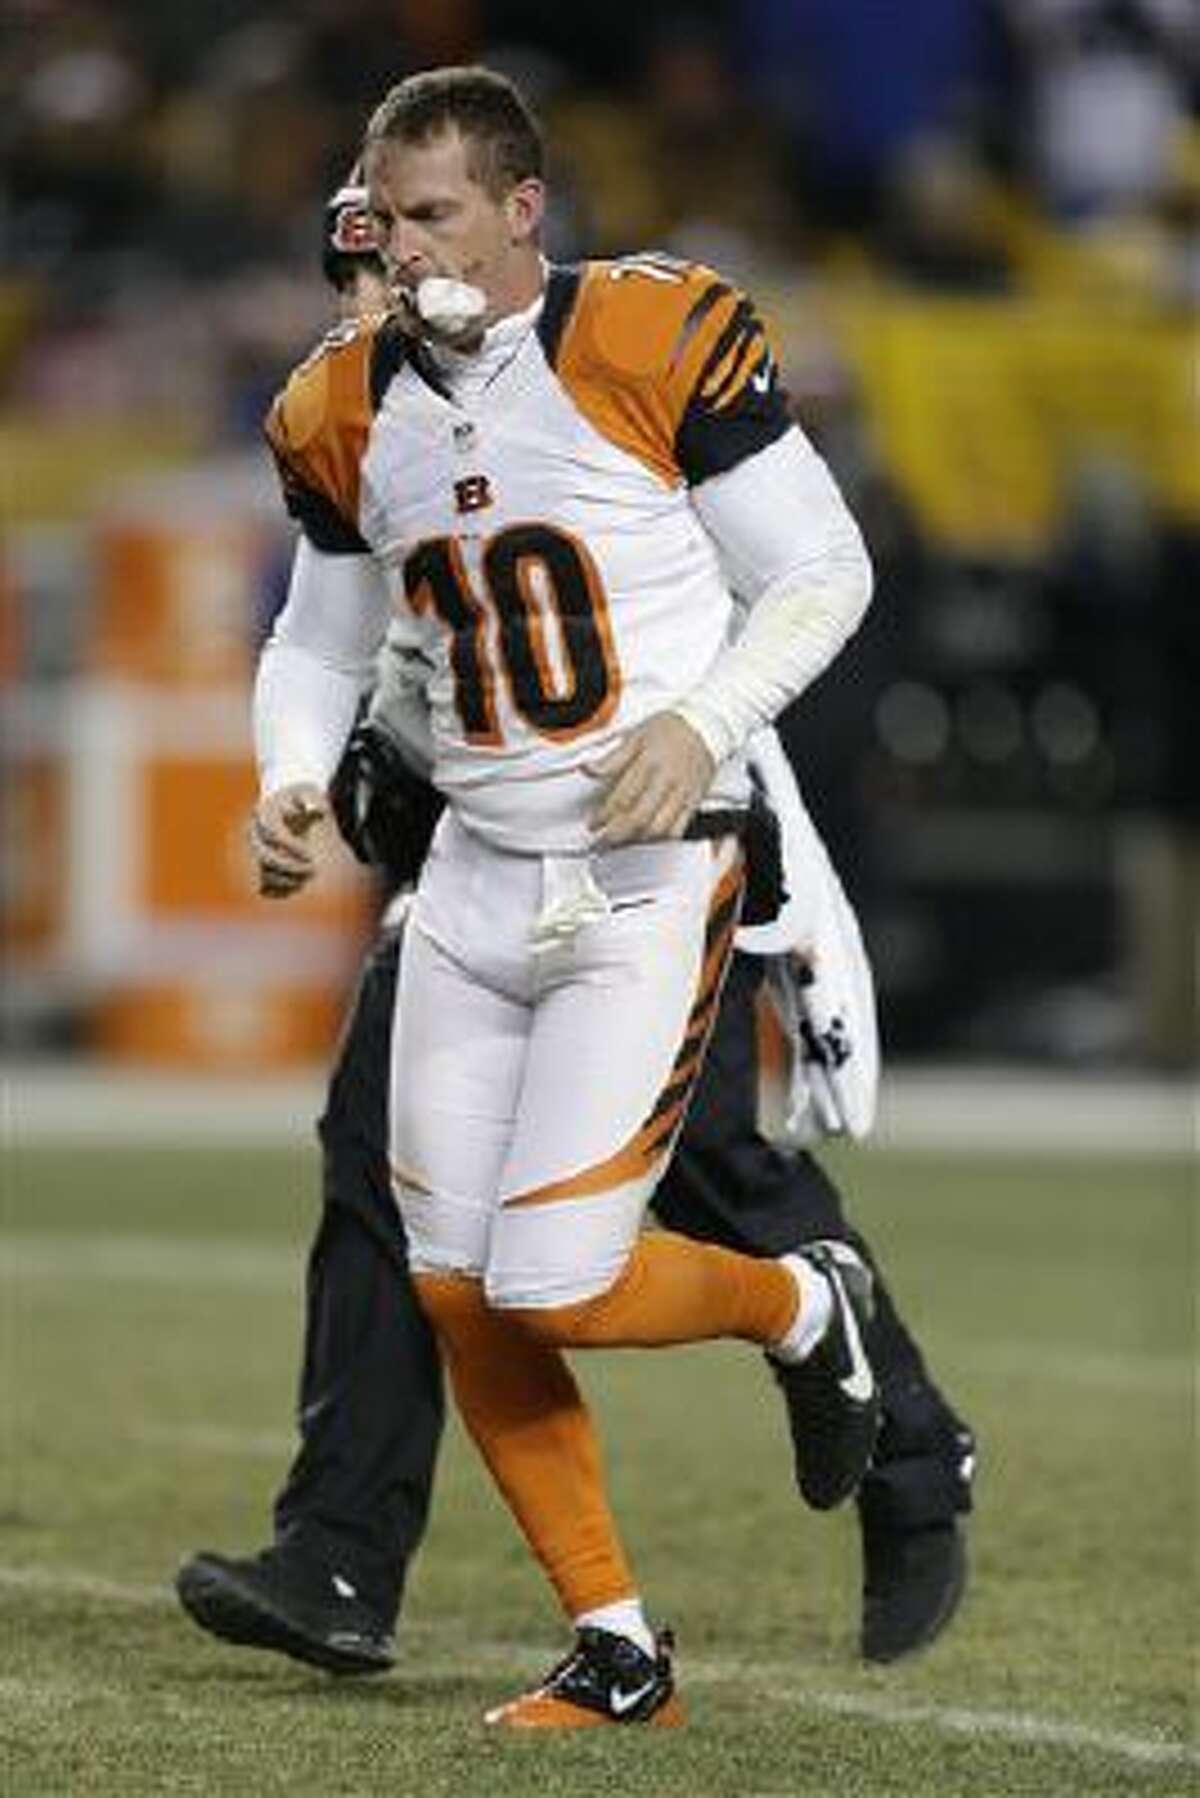 Cincinnati Bengals punter Kevin Huber (10) is taken from the field after being injured in the first half of an NFL football game between the Pittsburgh Steelers and the Cincinnati Bengals on Sunday, Dec. 15, 2013 in Pittsburgh.